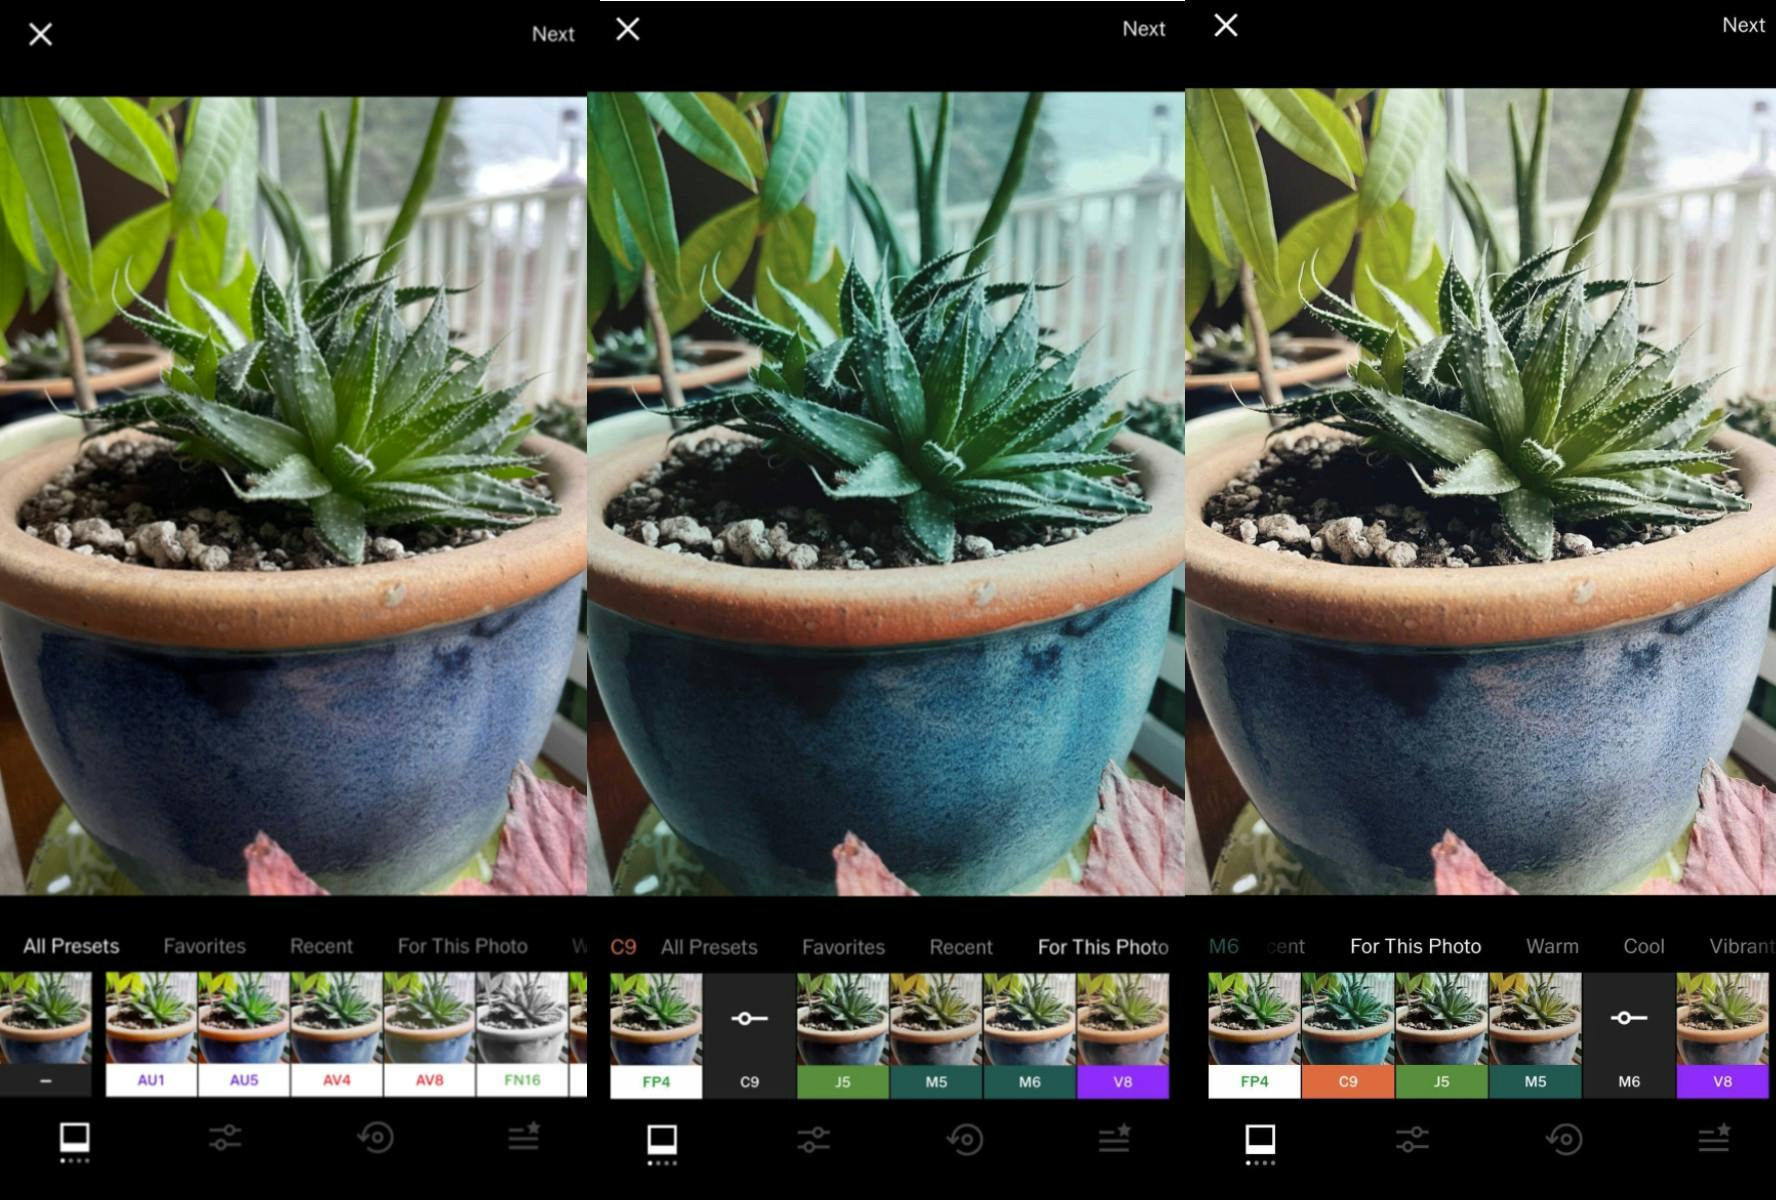 A plant photo being edited in VSCO